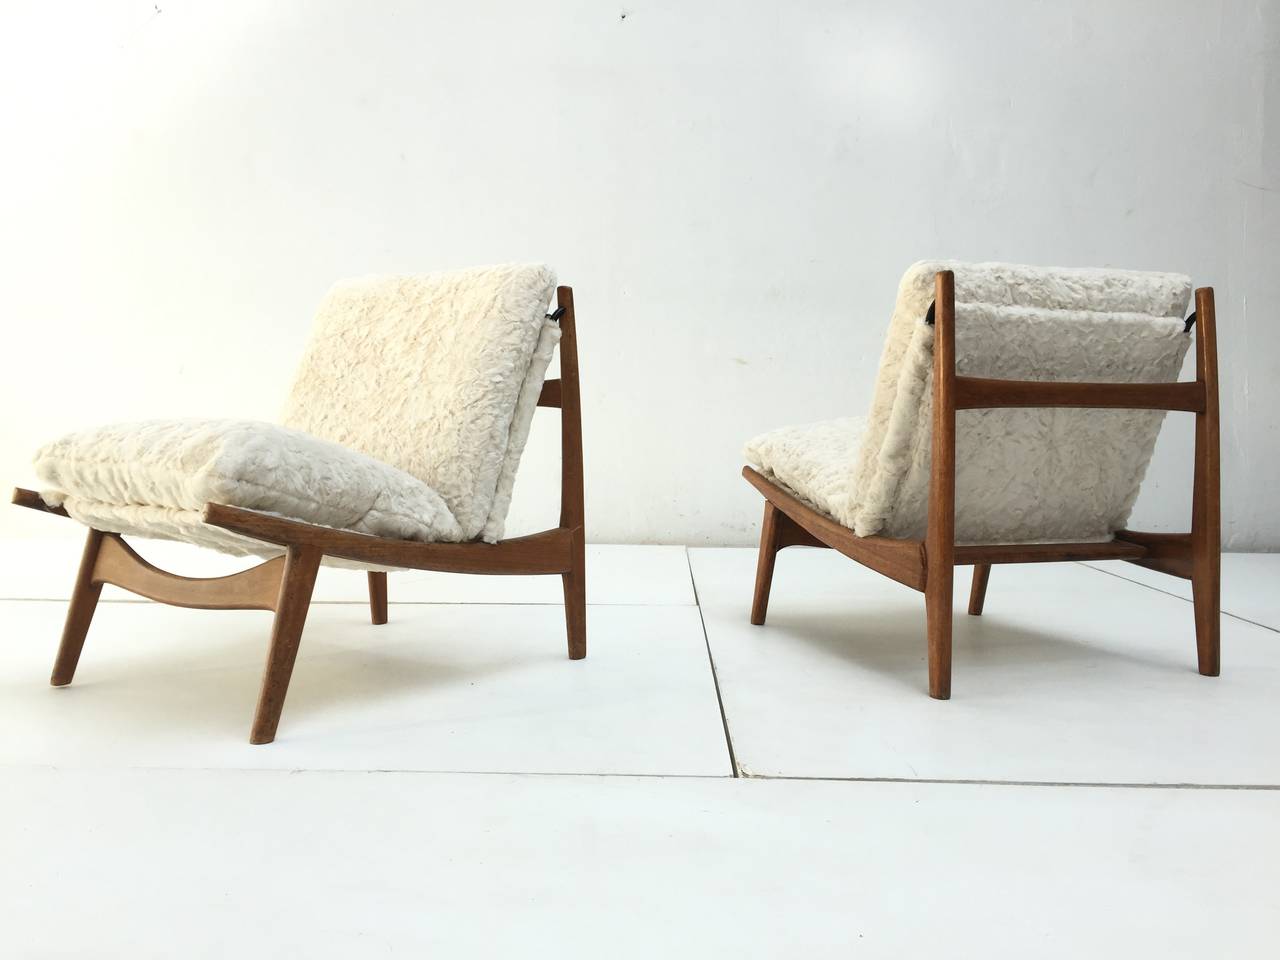 Pair of beautiful, organic form, model '790' lounge chairs designed by Joseph Andre Motte (1925-2013) for Steiner, France in 1960. 

To complement the stunning organic form of the oakwood structure and to further maintain the original